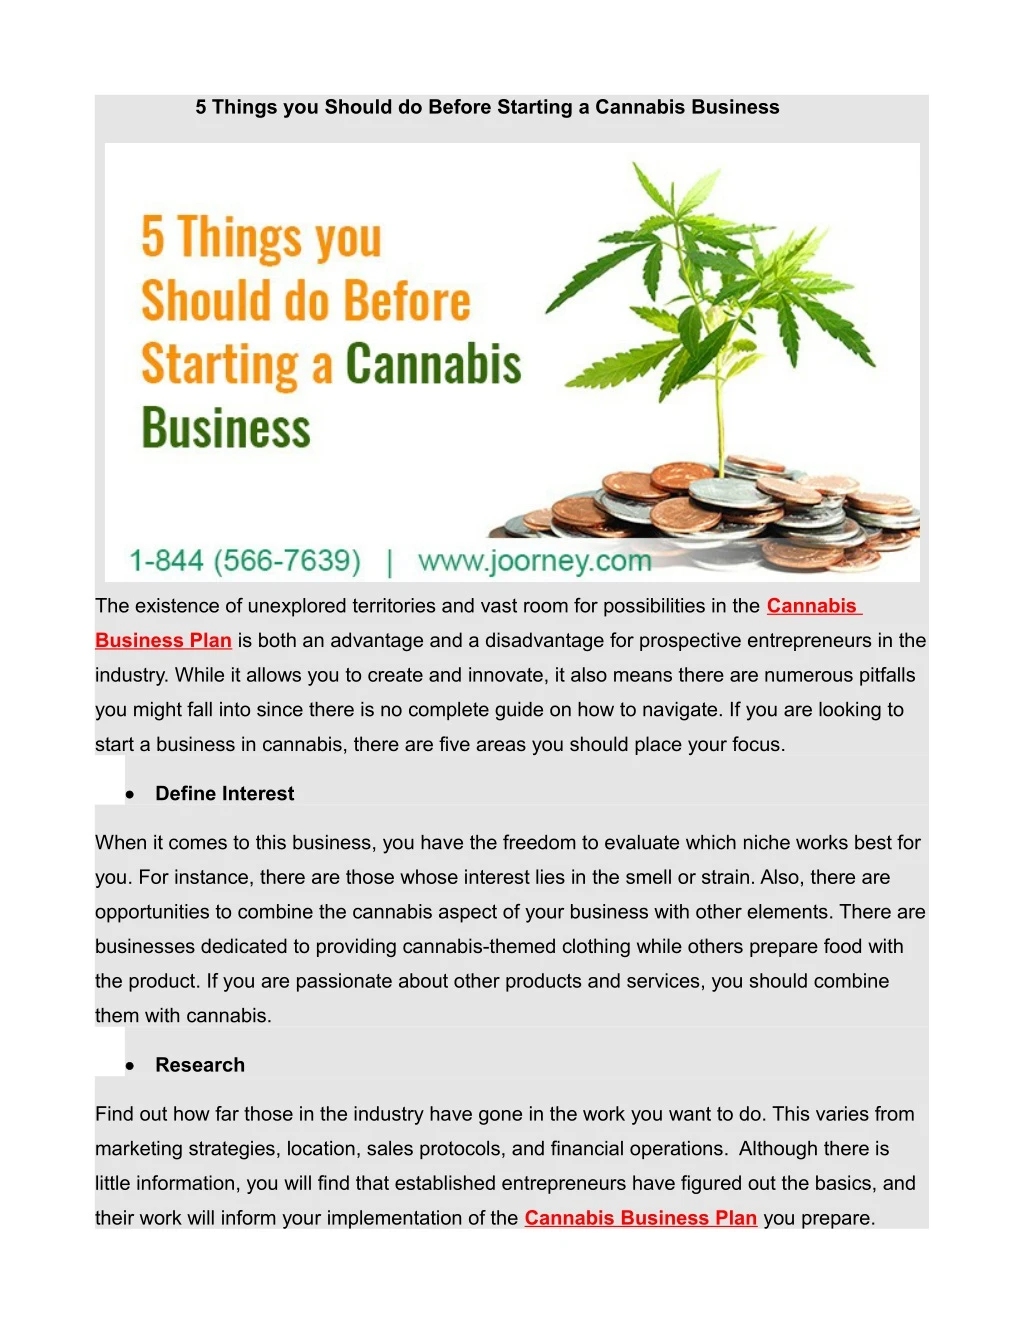 5 things you should do before starting a cannabis